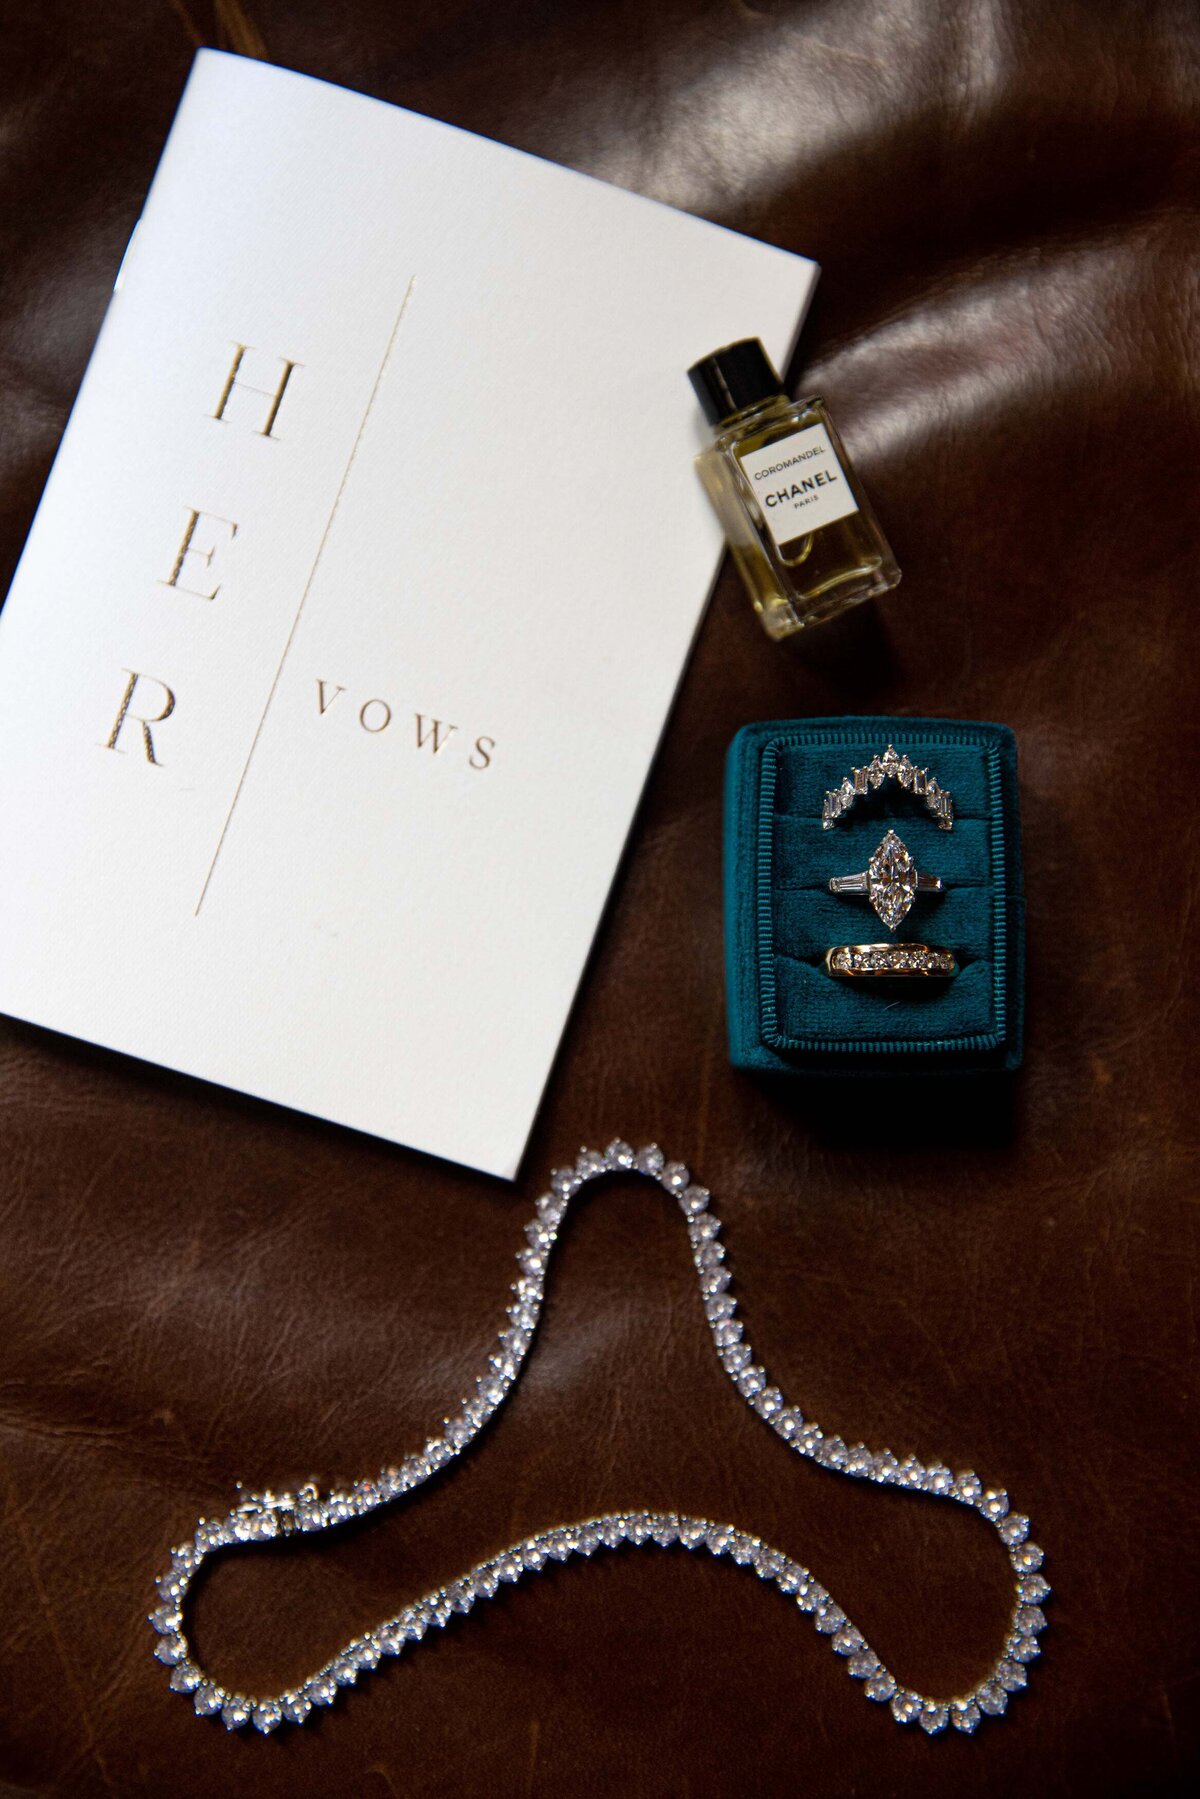 Jewelry next to a book with vows.